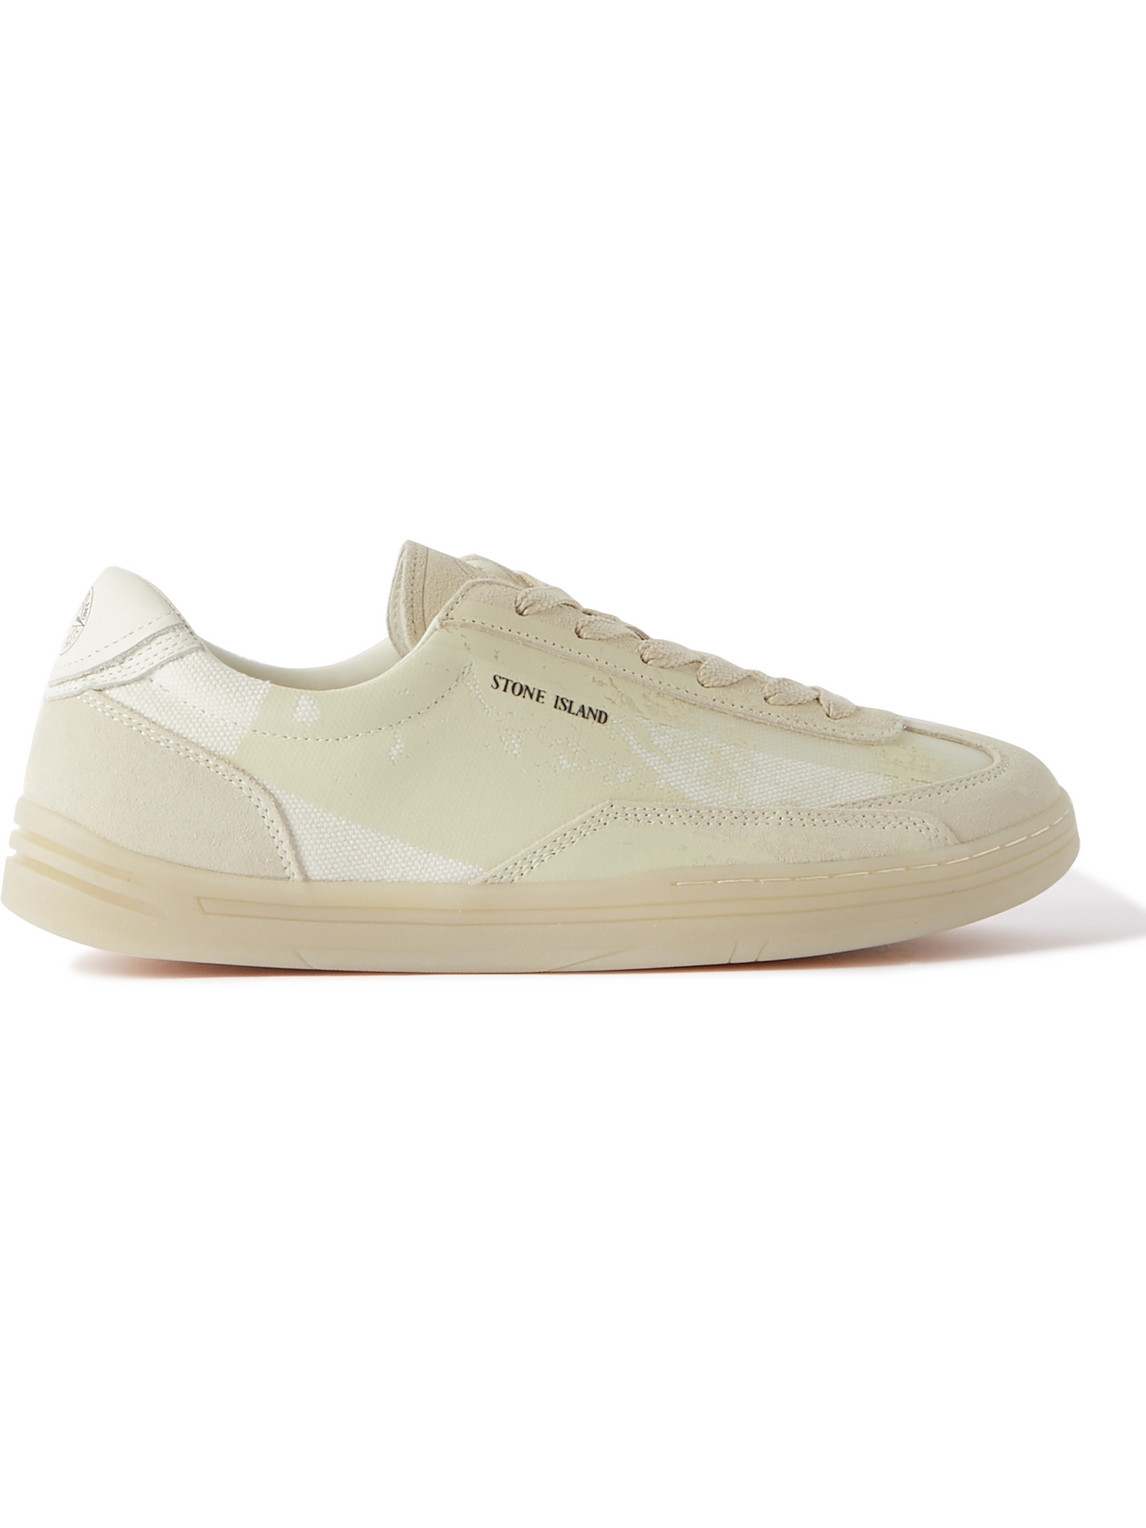 STONE ISLAND ROCK PRINTED LEATHER- AND SUEDE-TRIMMED CANVAS SNEAKERS